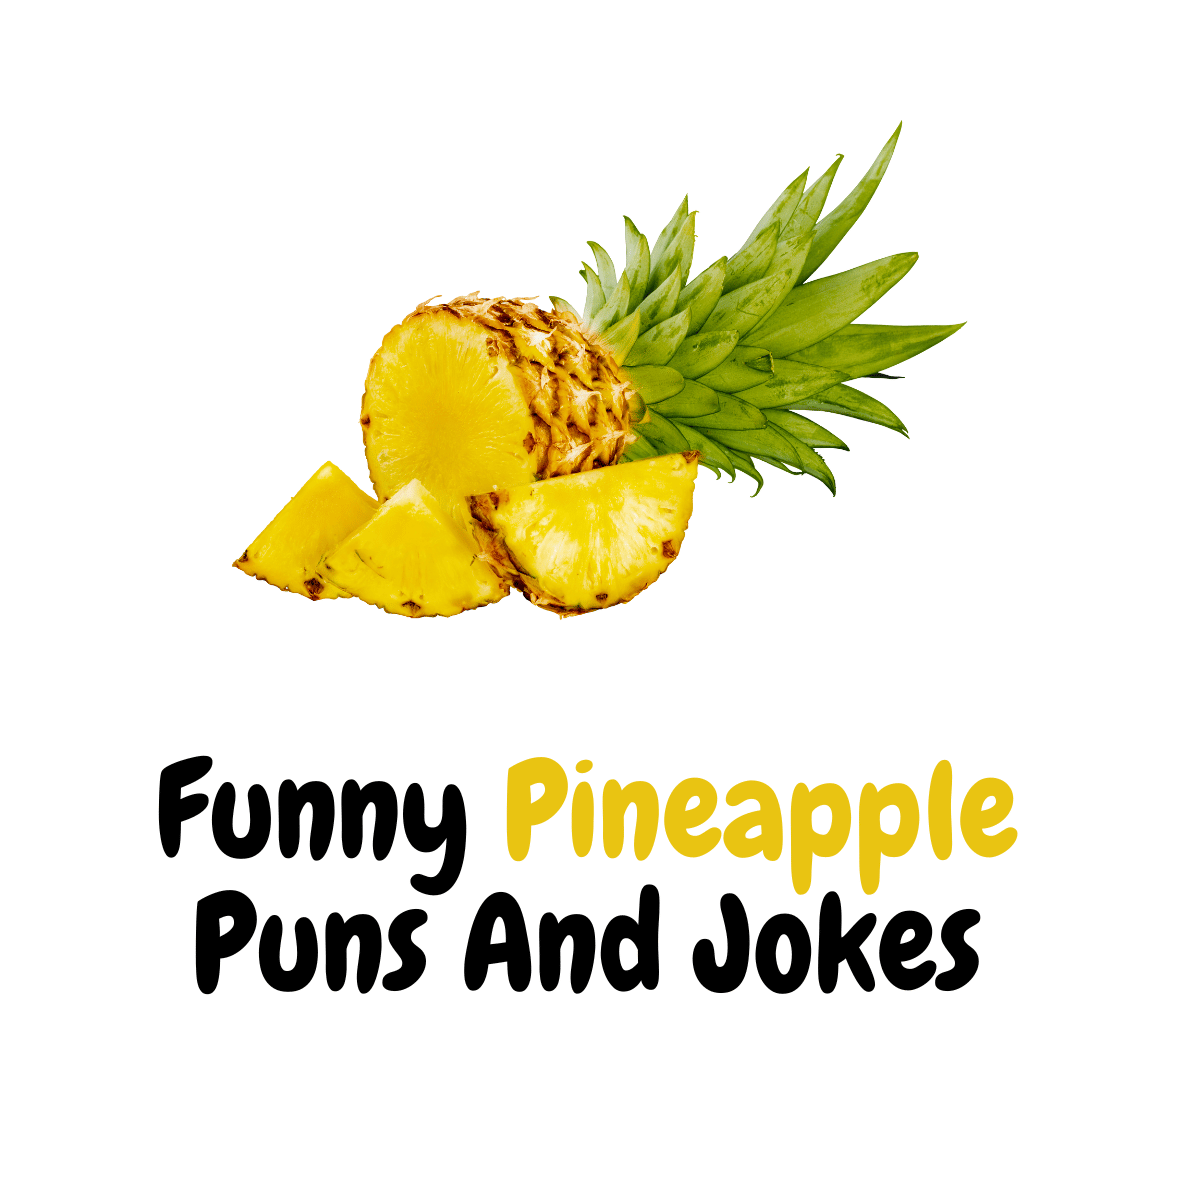 90+ Funny Pineapple Puns And Jokes